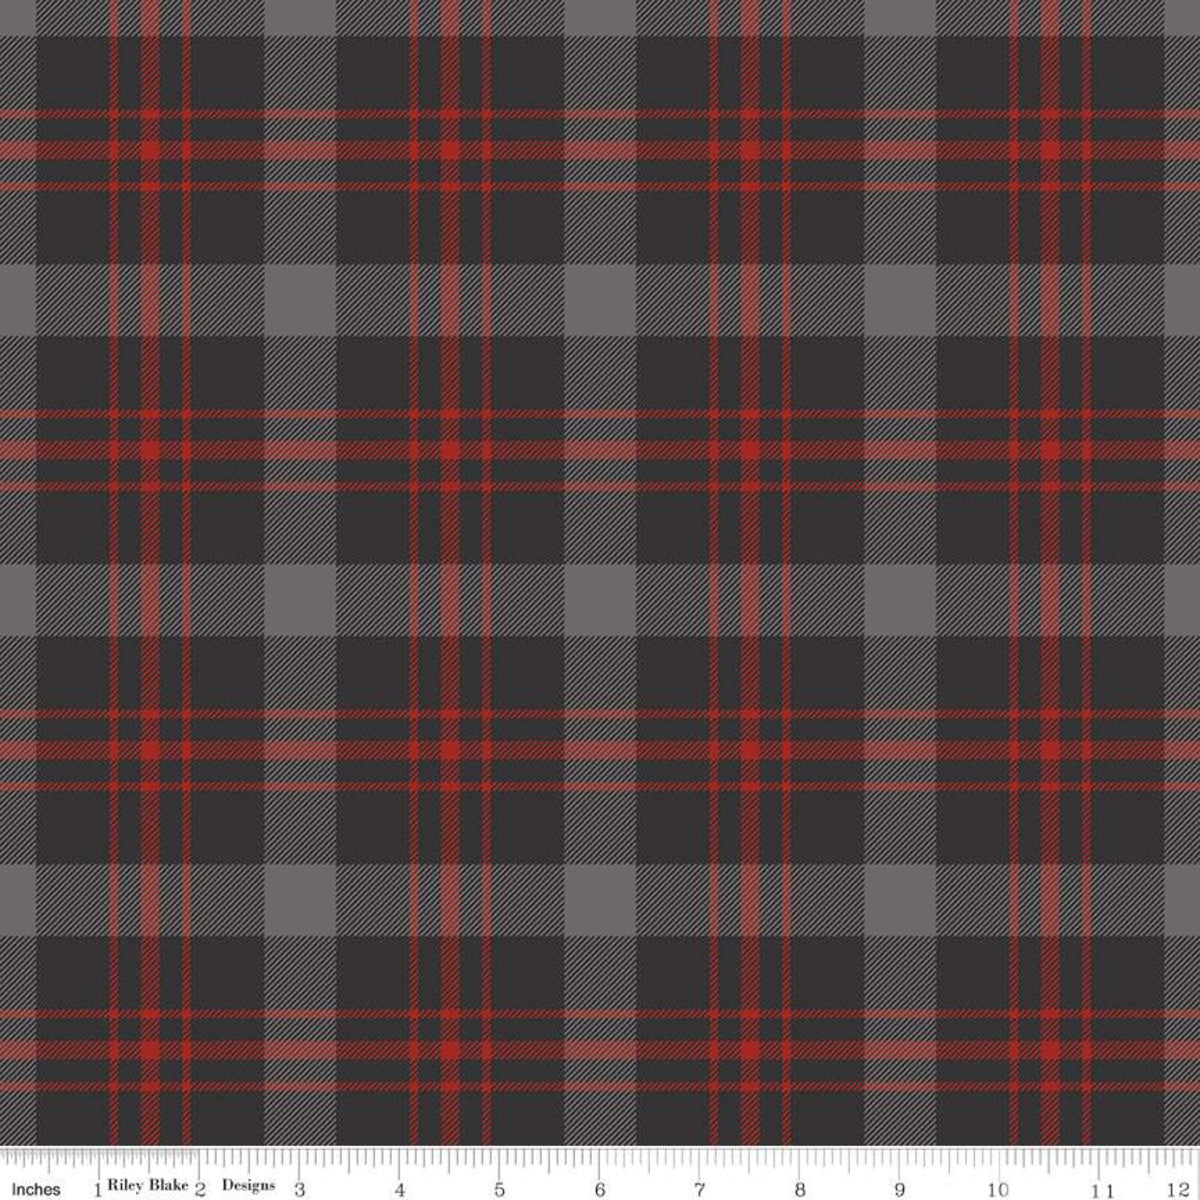 Tartan Red and Black - Weave & Woven